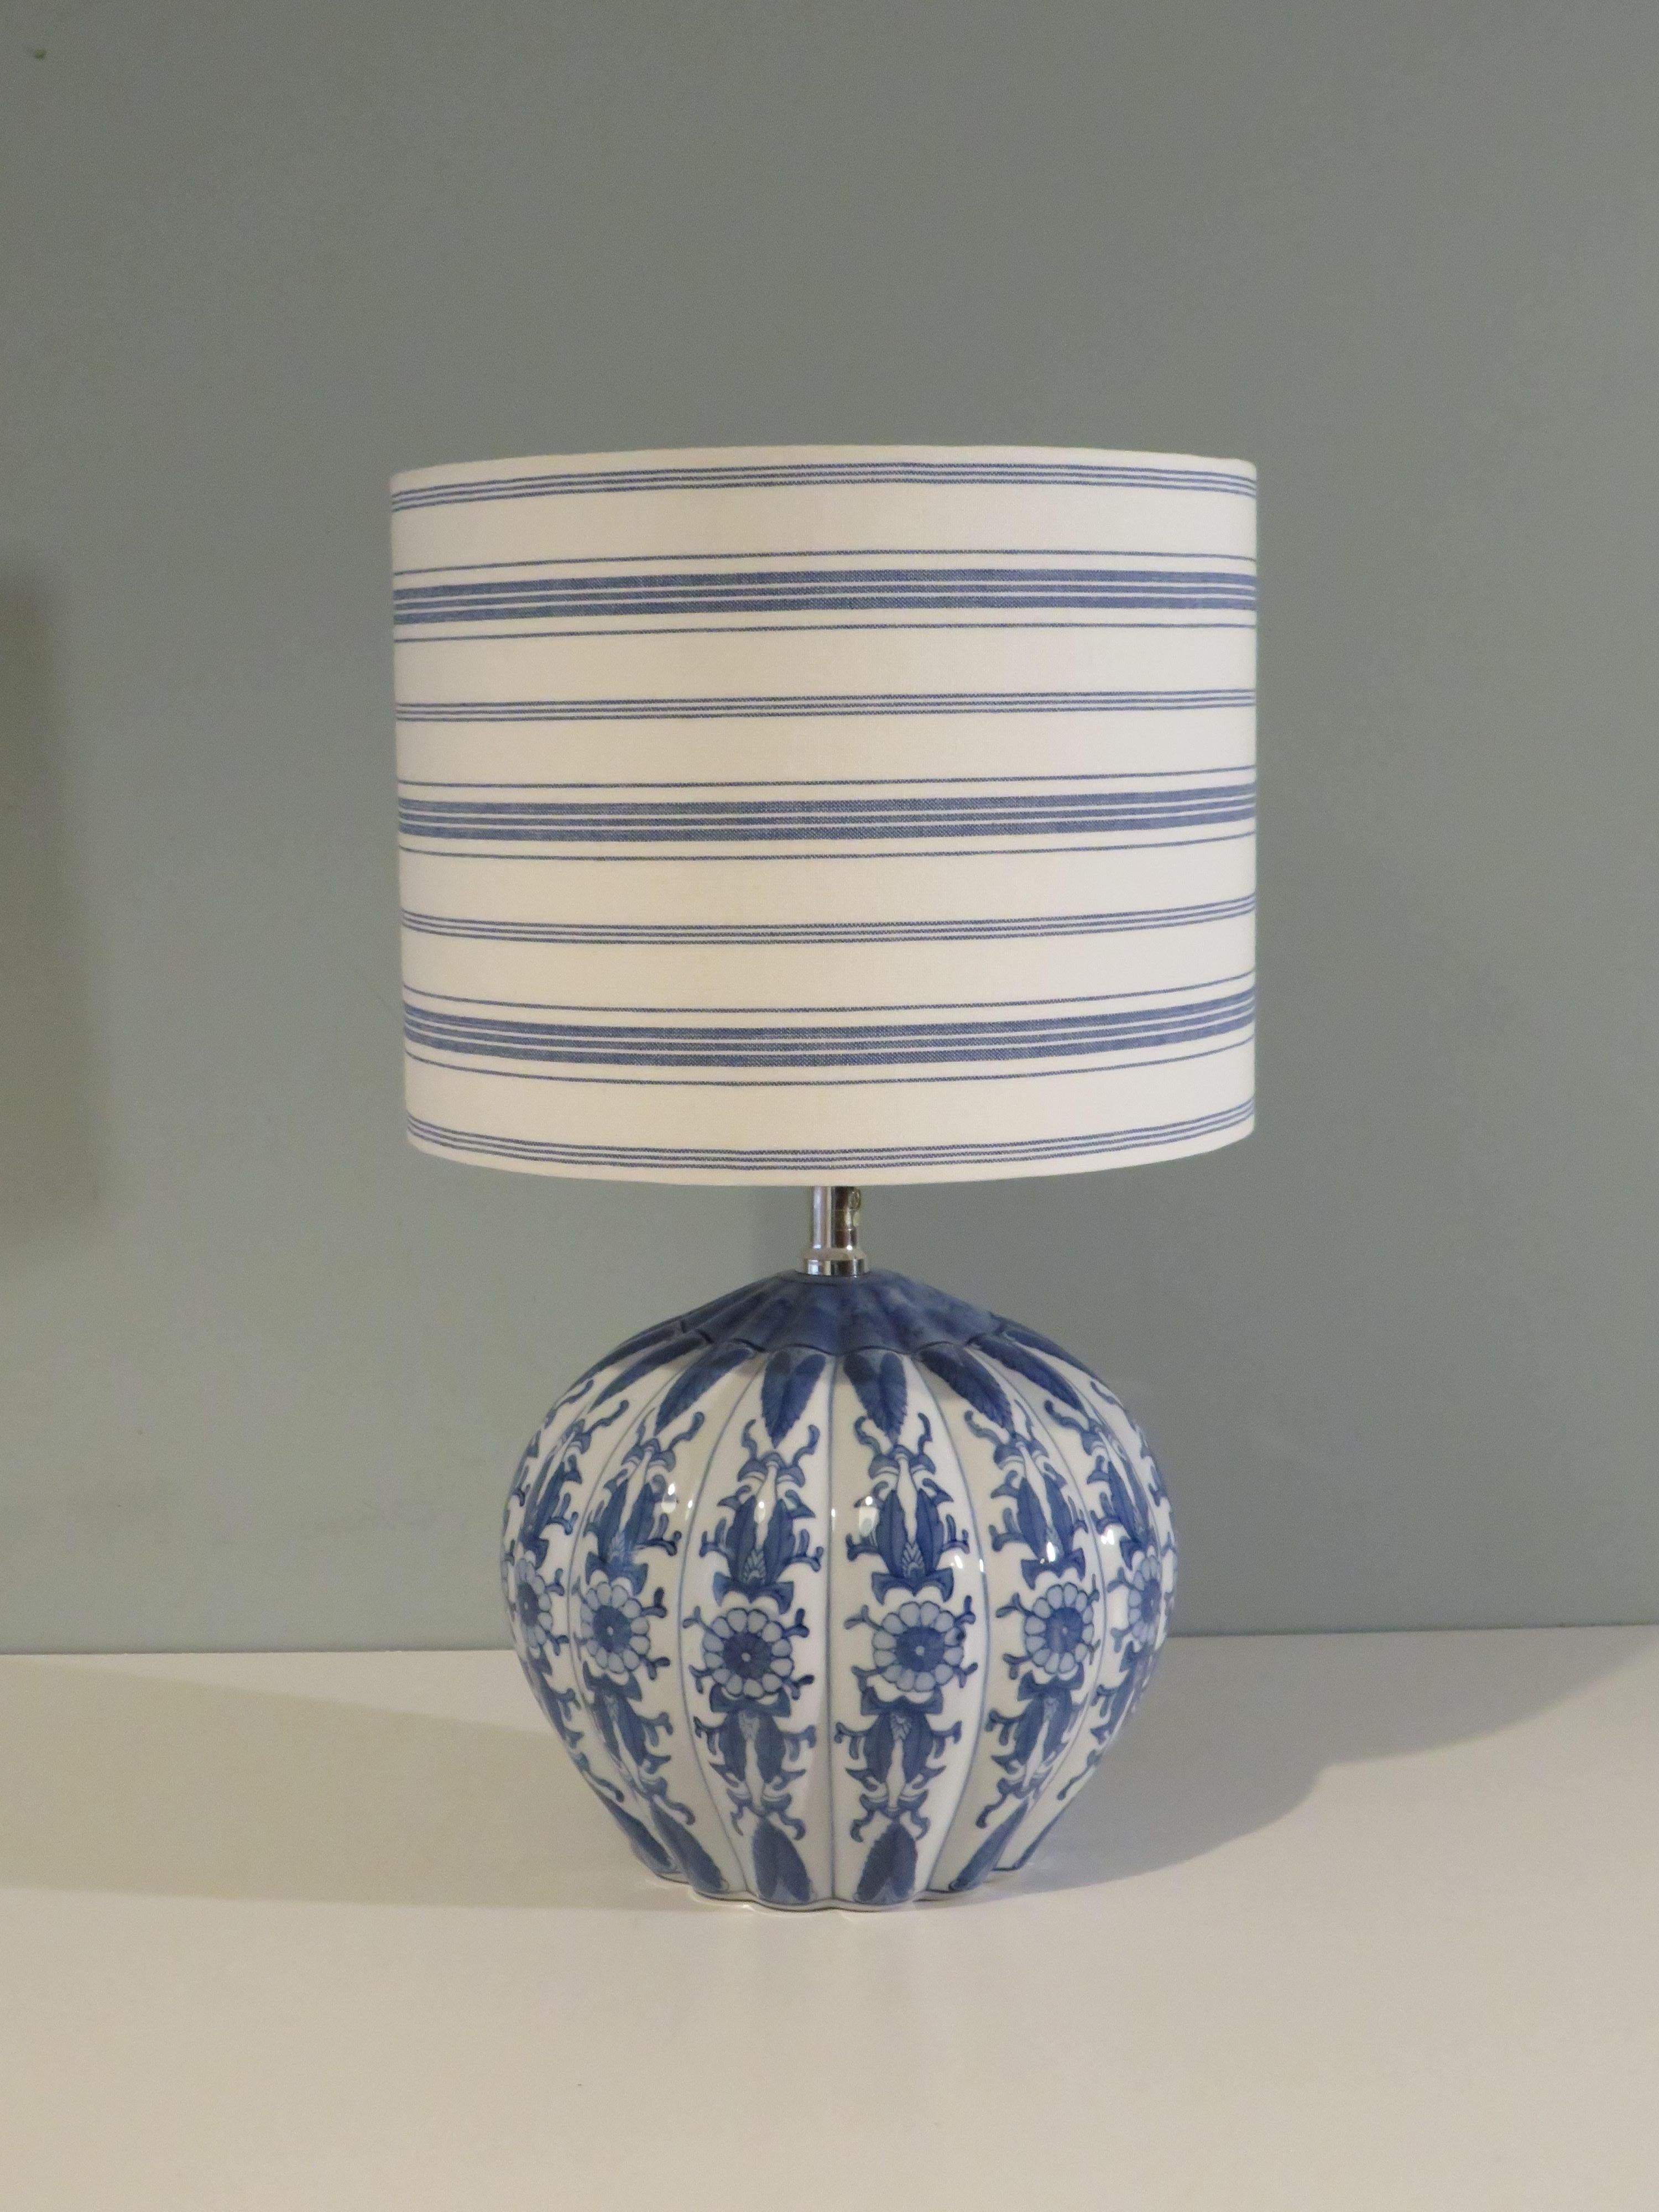 Oriental inspired blue and white glazed ribbed spherical lamp base.
With a custom handmade lampshade with linen blue and white striped fabric.
The lamp base has an E 27 fitting and can be turned on and off at the socket.
When delivered to the US, an